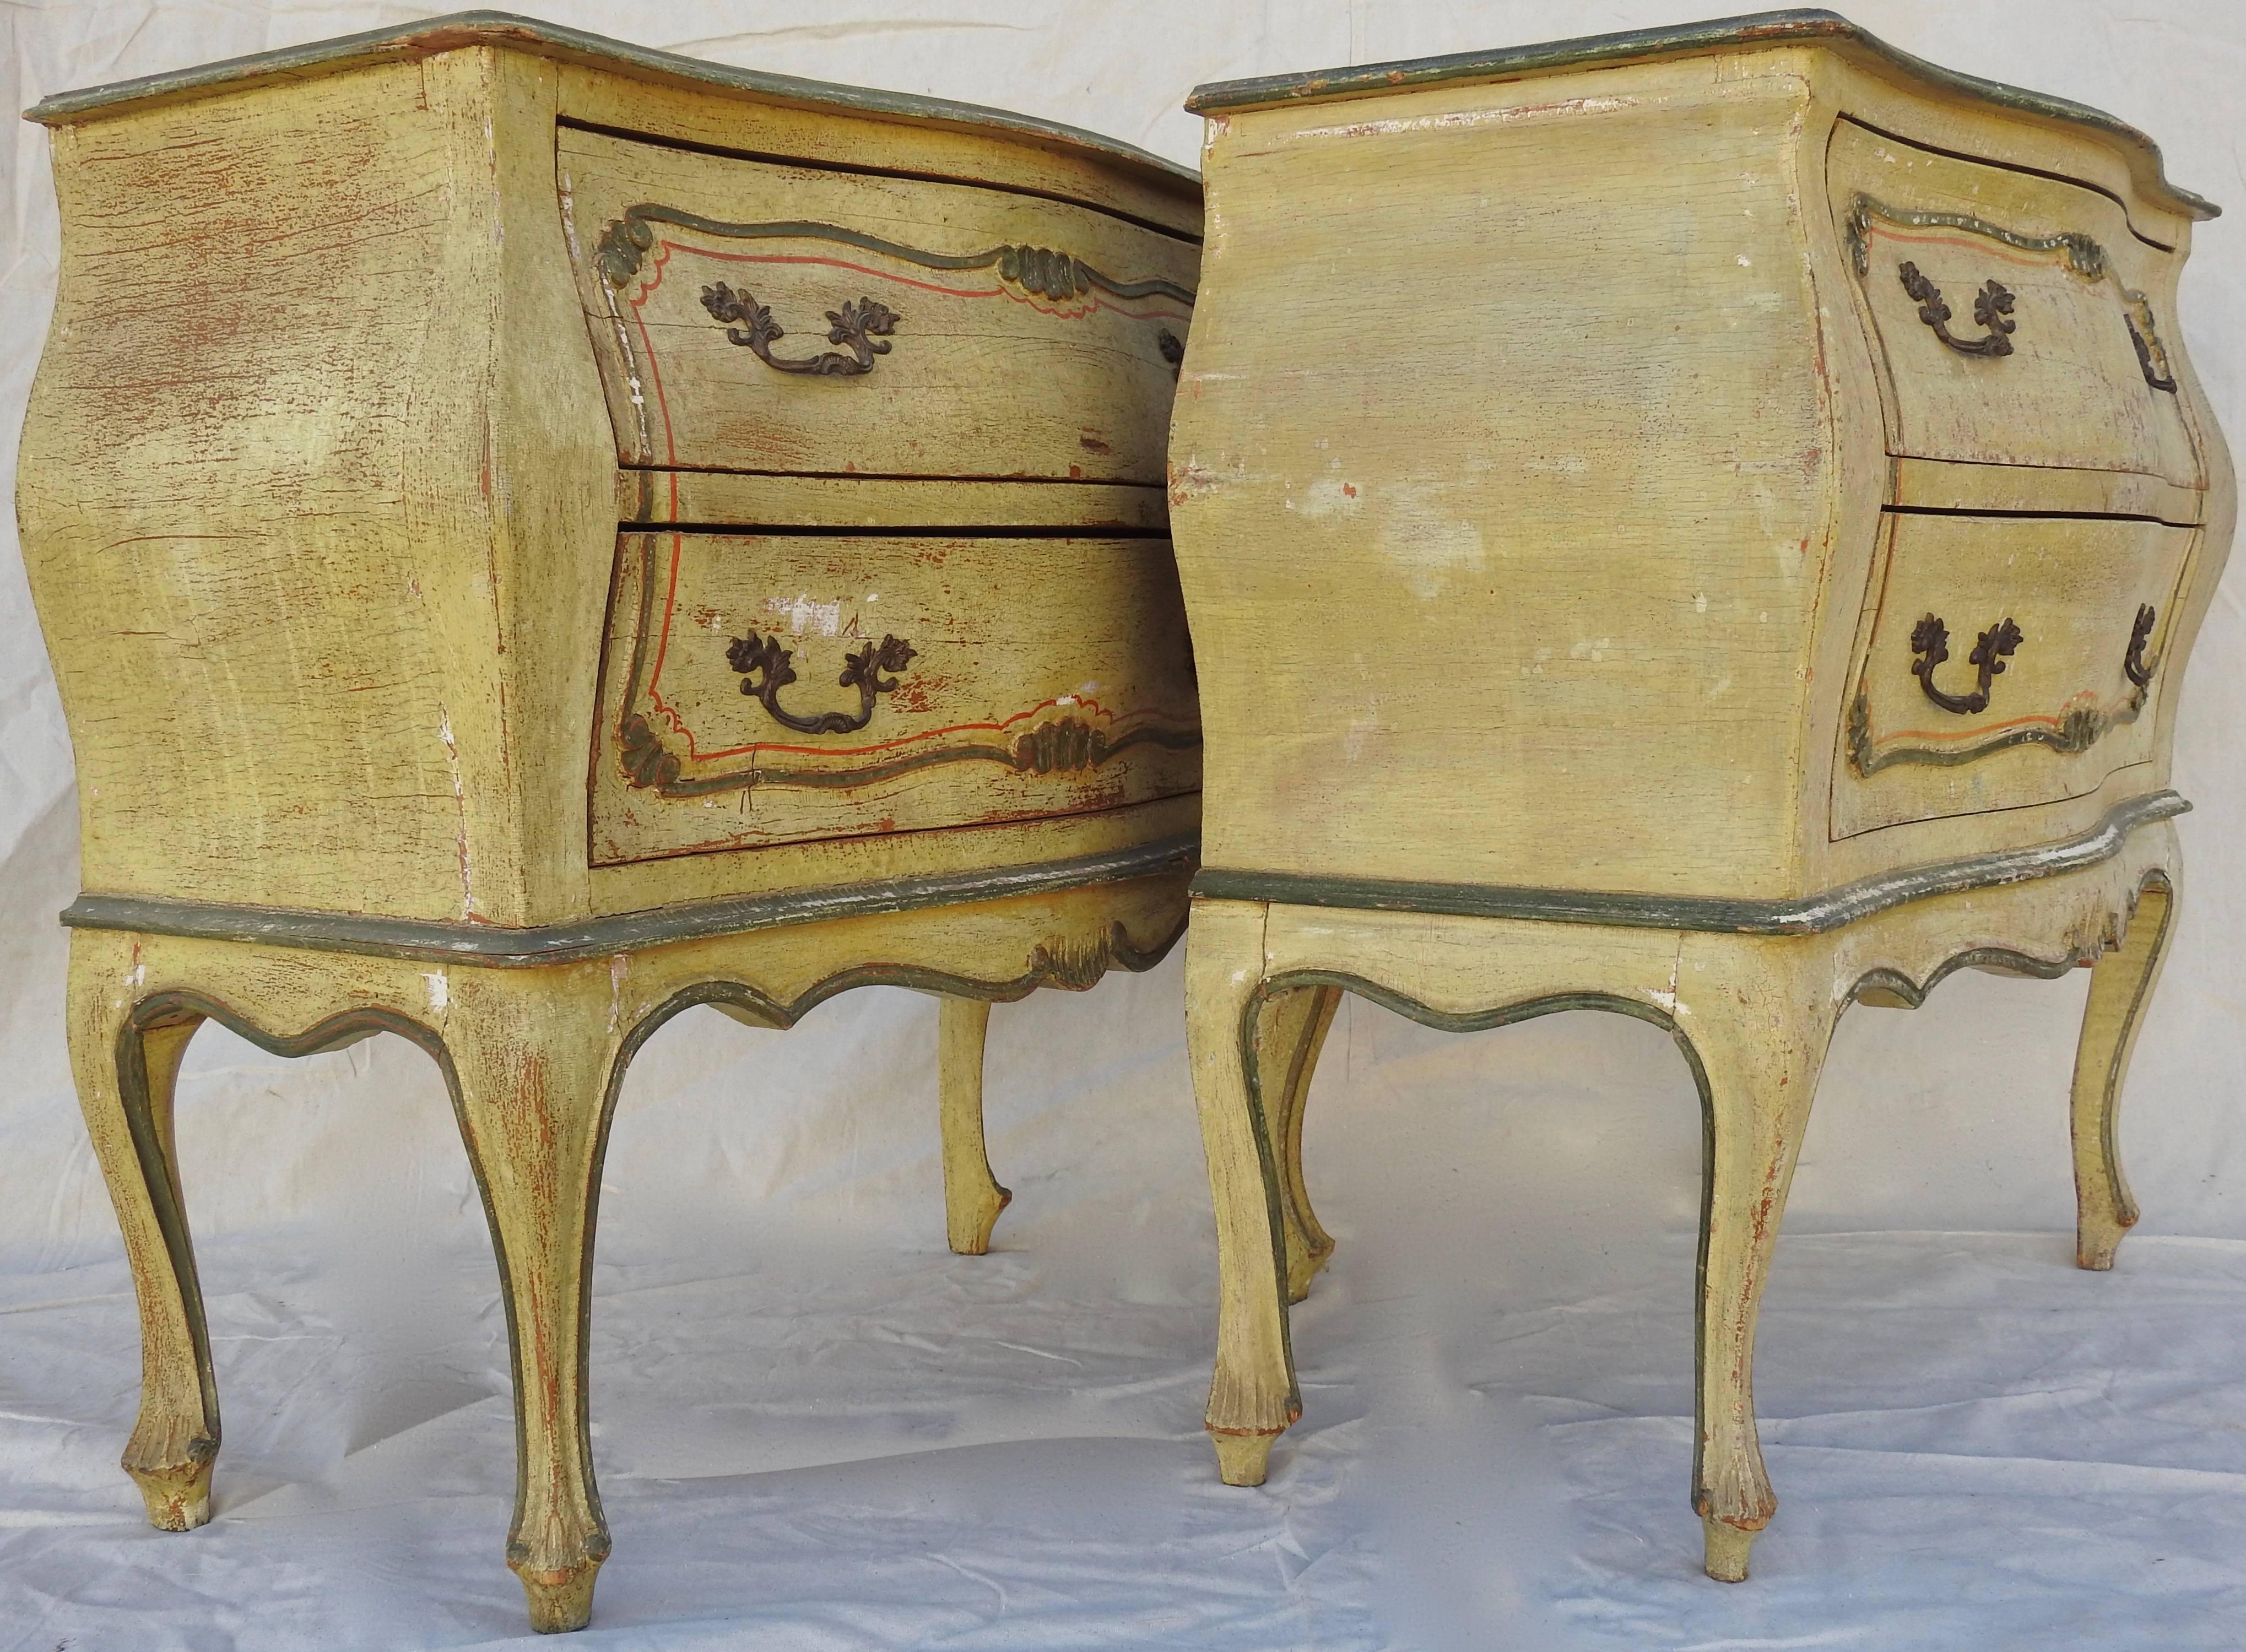 The graceful carved sides will make these hand-painted Bombay chests stand out in your abode. They have been finished in a soft gold with accents of green and orange. The two drawers are completed with bronze pulls. The interior of the drawers are